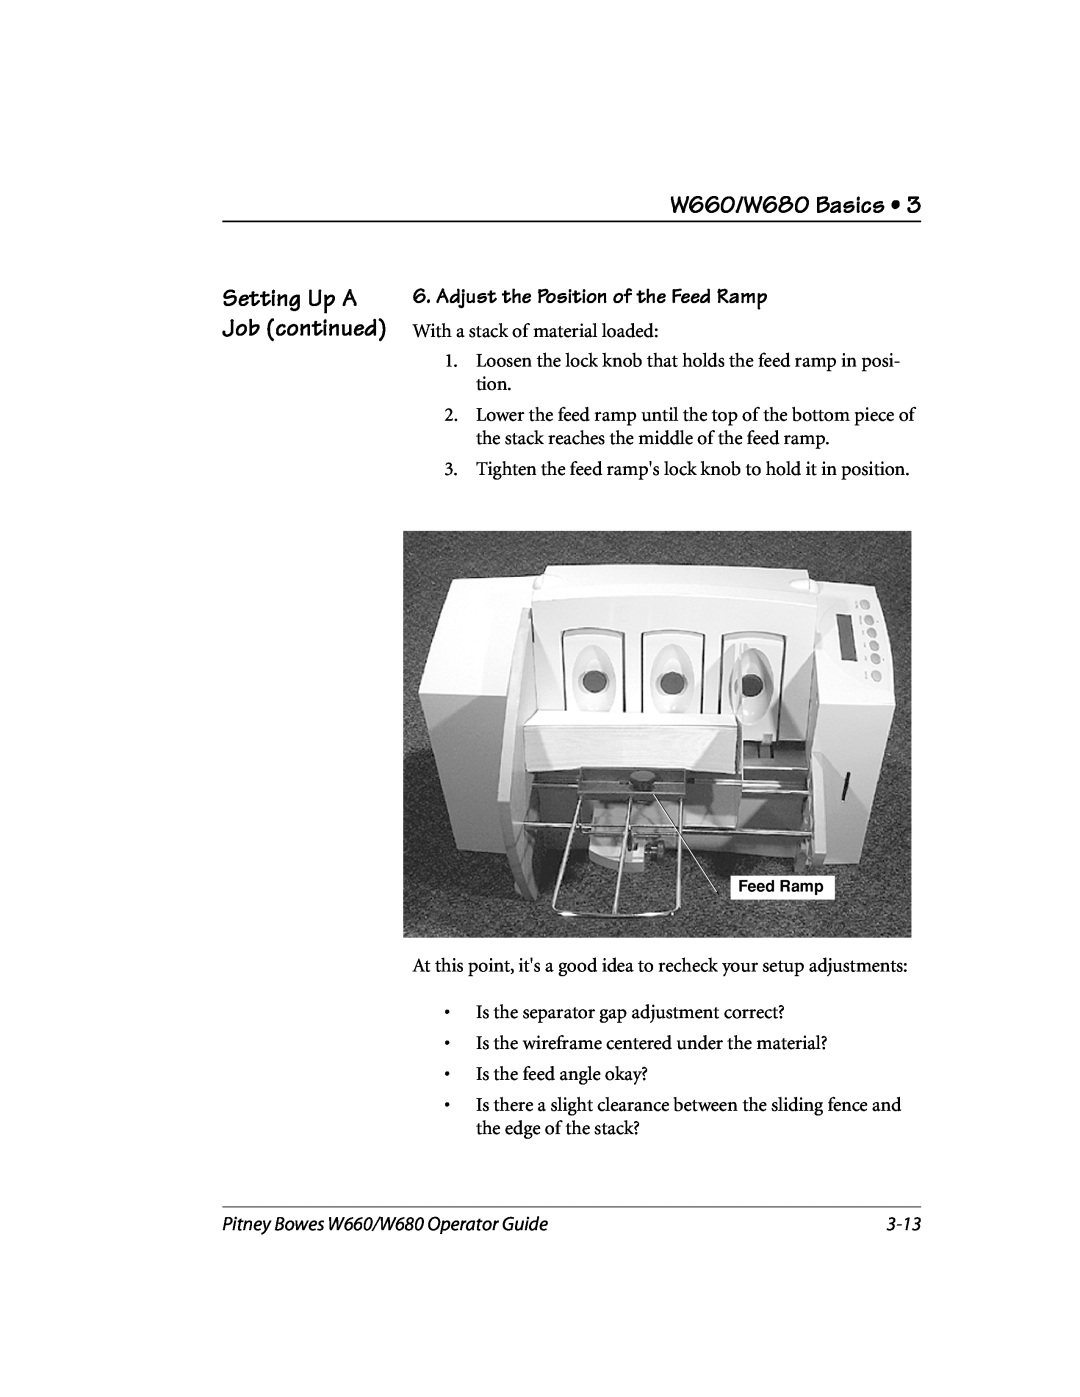 Pitney Bowes manual Adjust the Position of the Feed Ramp, 3-13, W660/W680 Basics, Setting Up A Job continued 